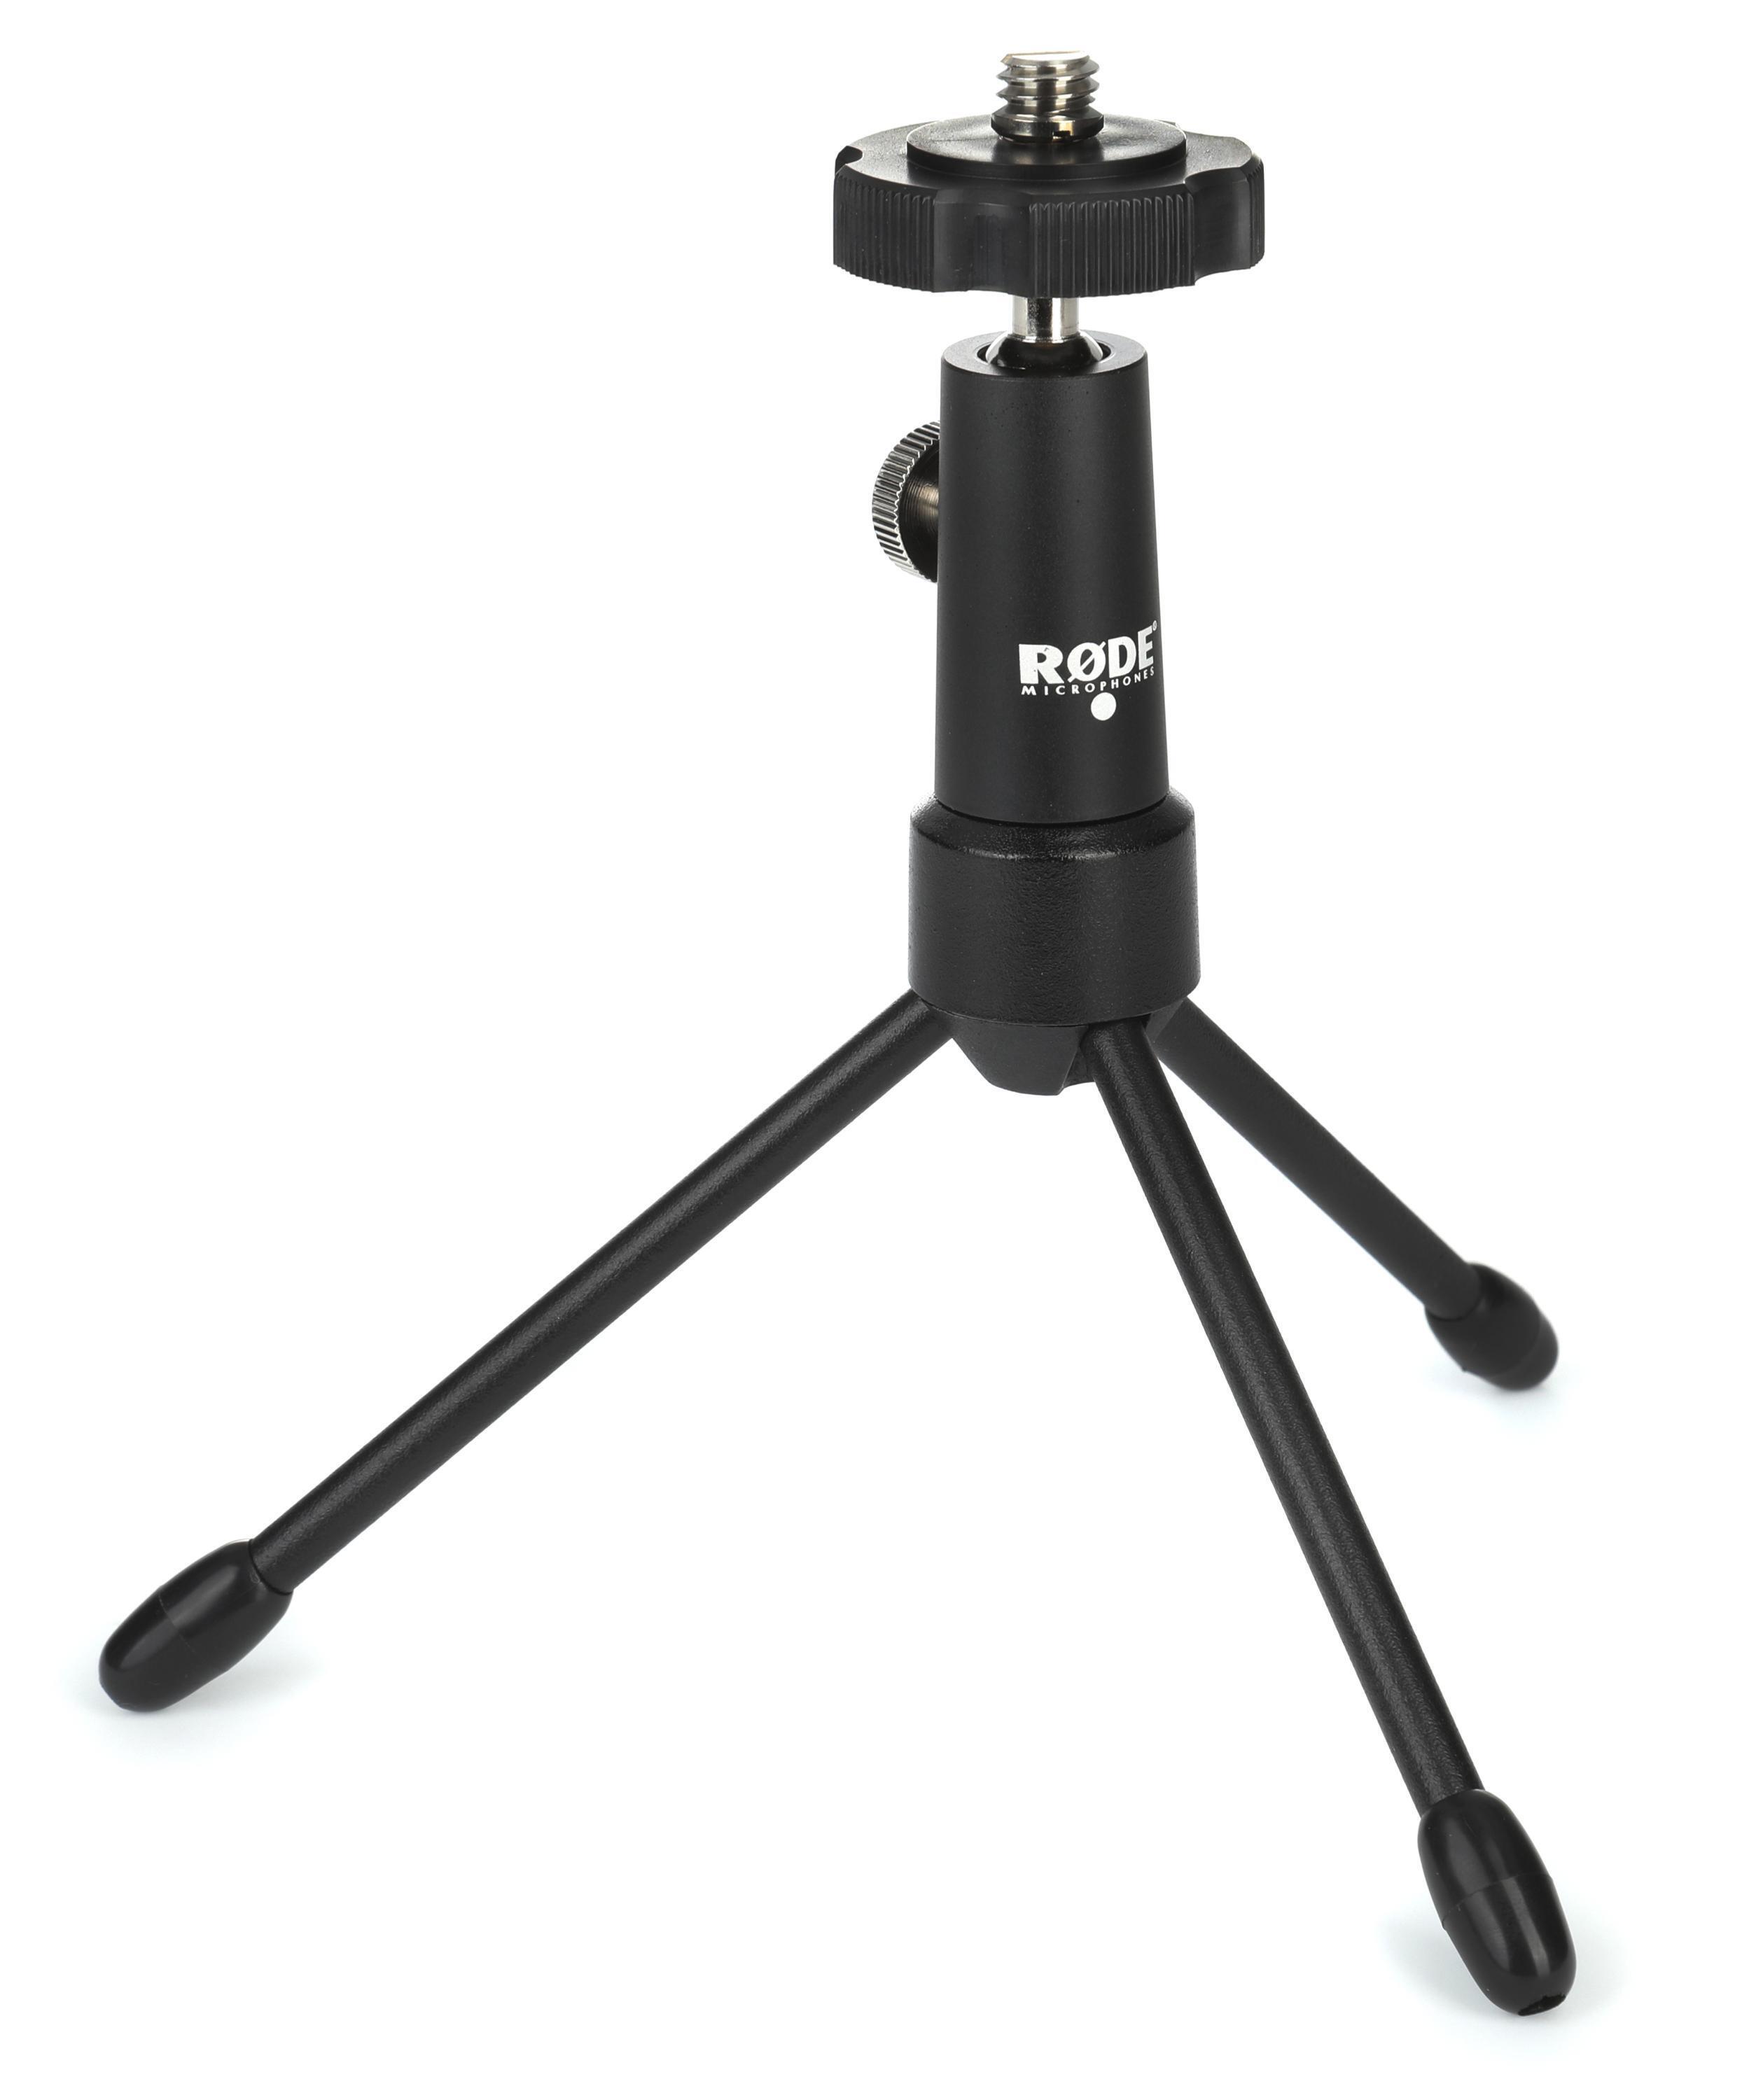 MEE audio Lightweight Mini Tripod for Webcams and Cameras